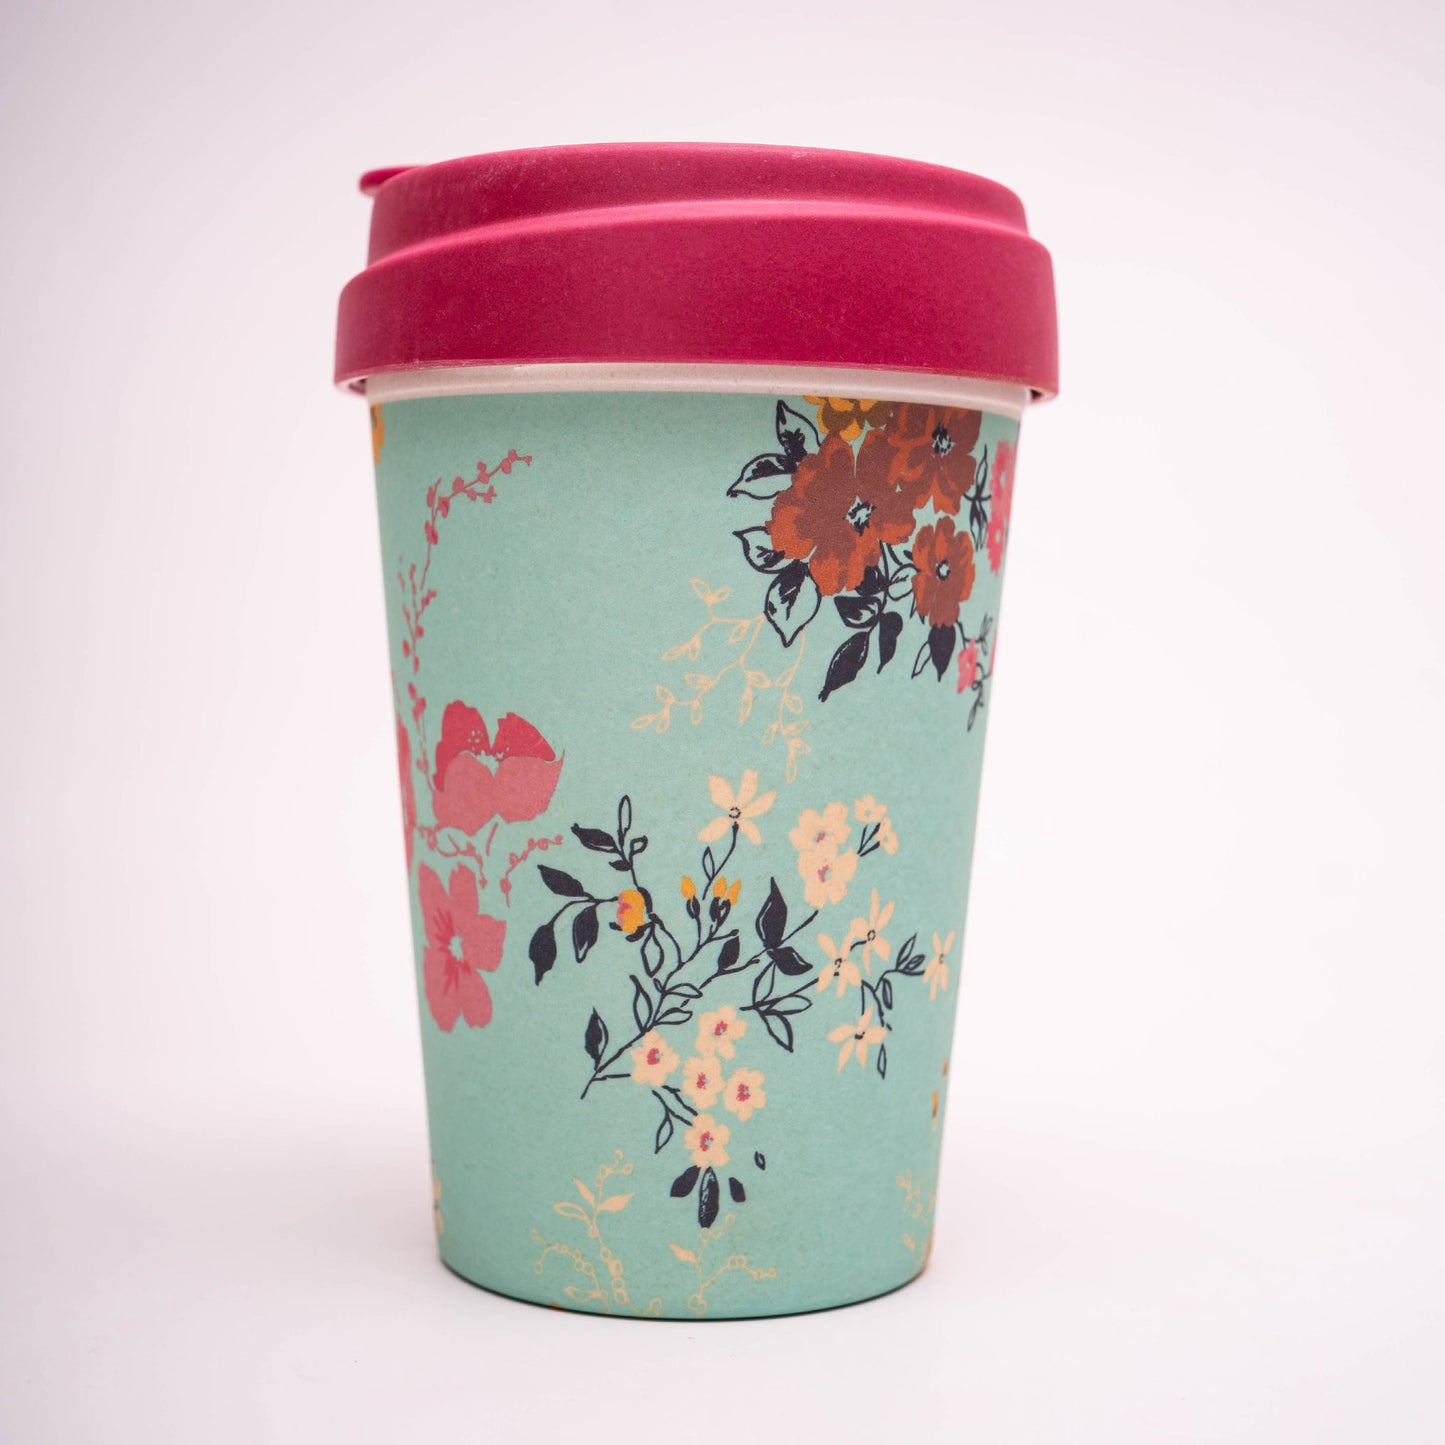 Flower Blossom 400ml Eco friendly Bamboo Mug with Silicon Grip